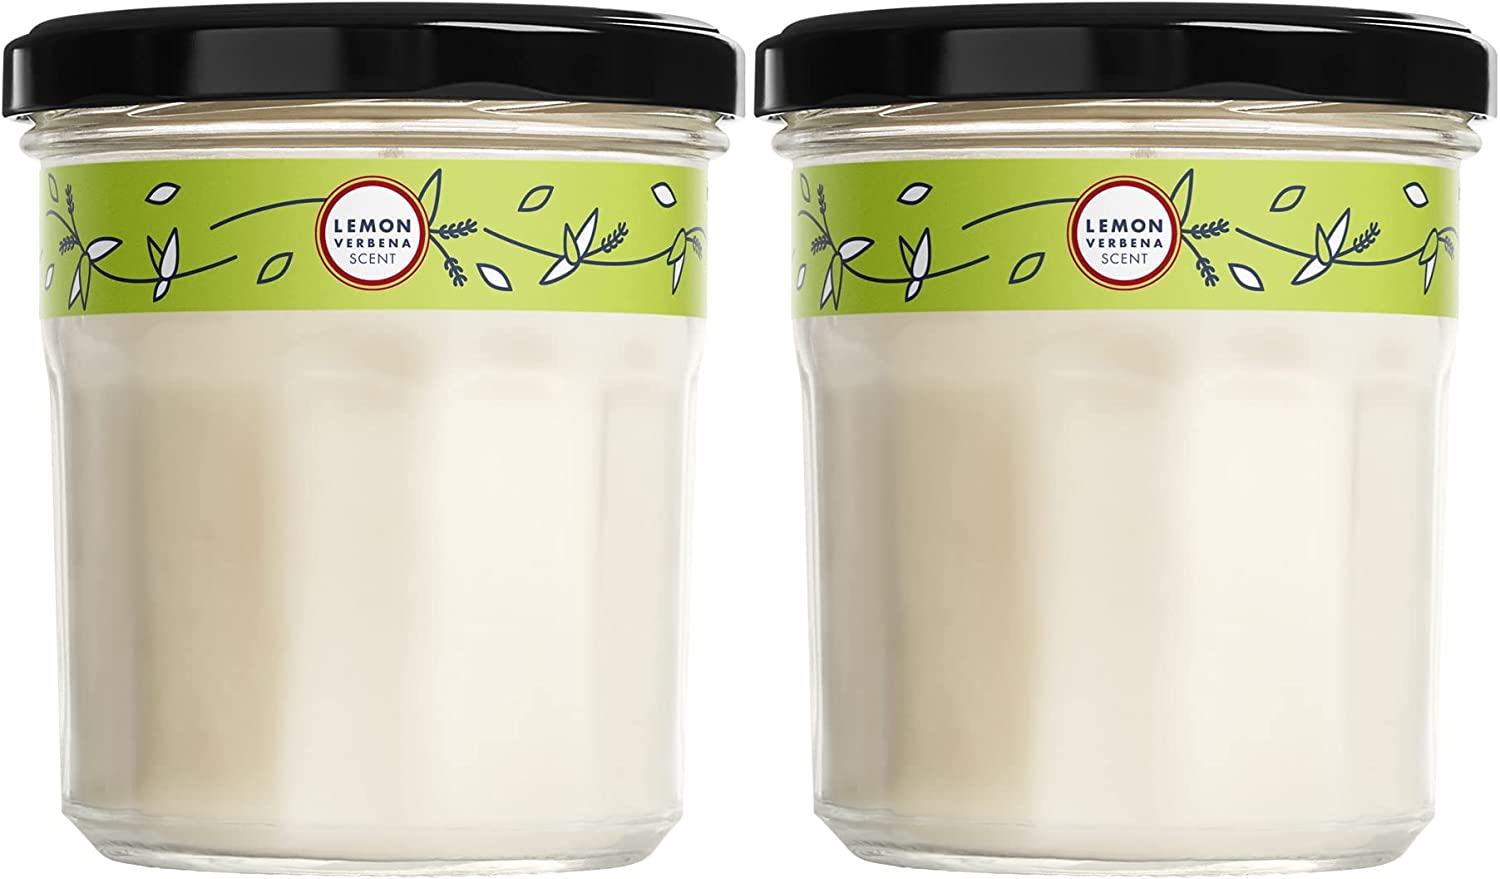 Mrs. Meyer’s Clean Day Soy Based Scented Candles, 2-Pack